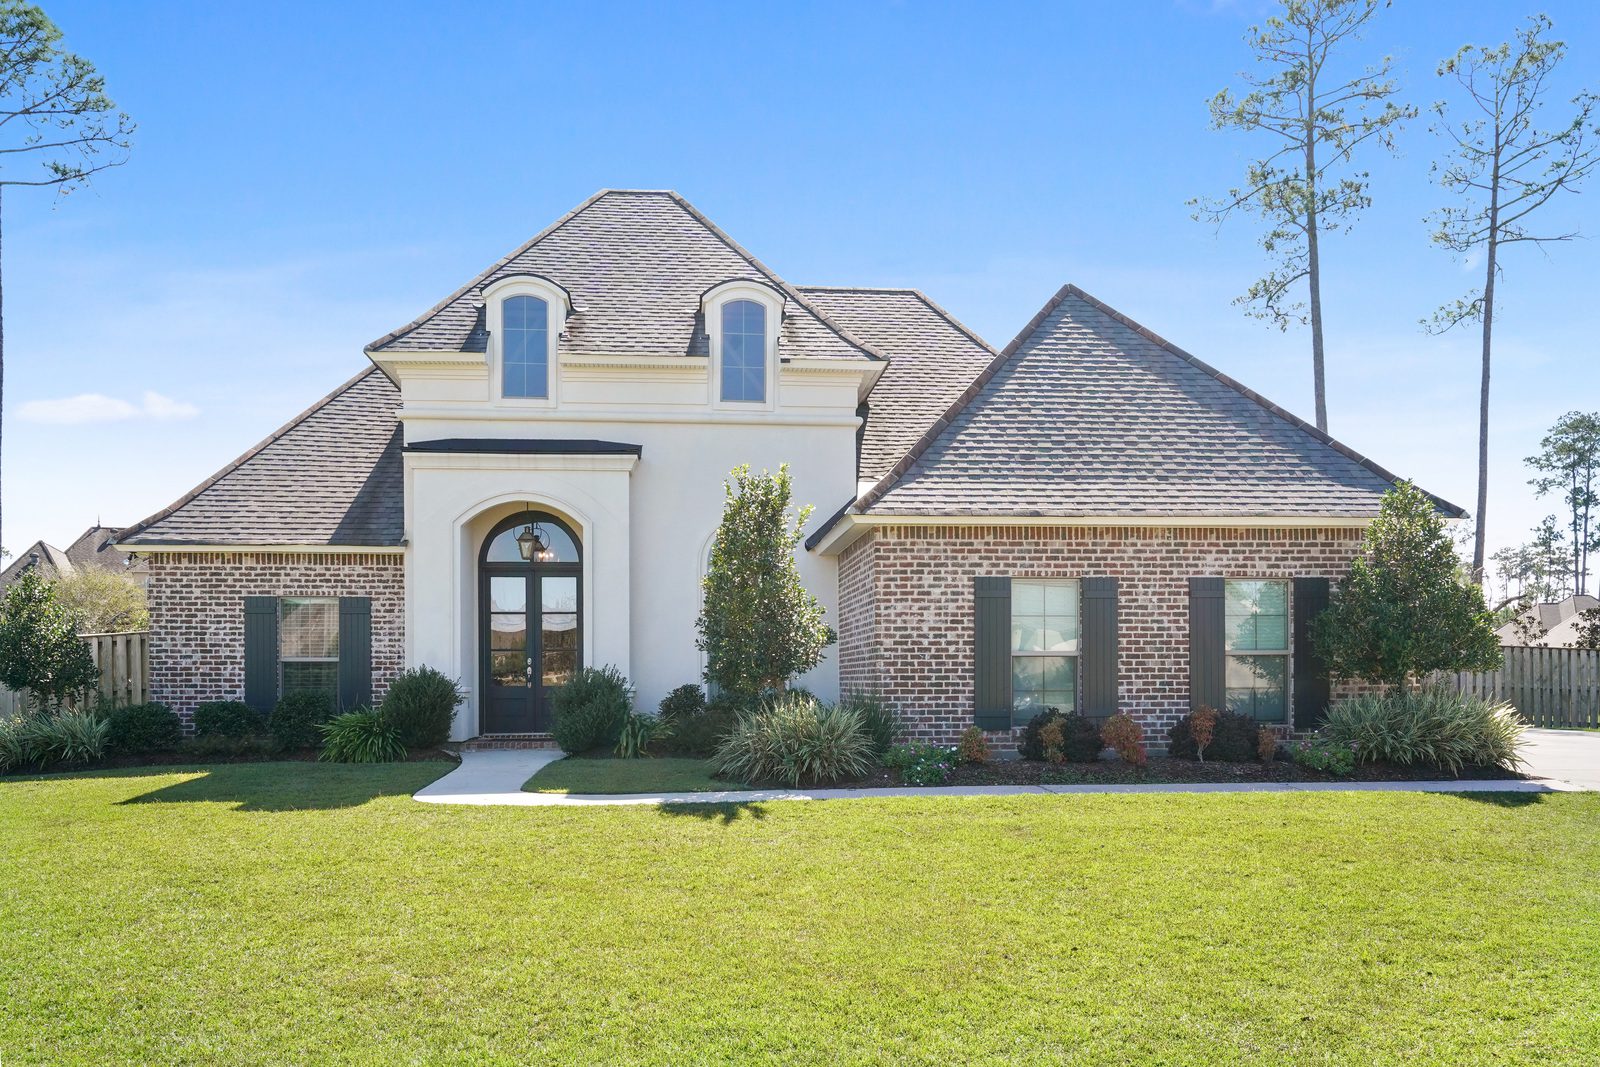 This home is fully landscaped and is located close to New Orleans. This home is built by a custom builder in a master planned community.